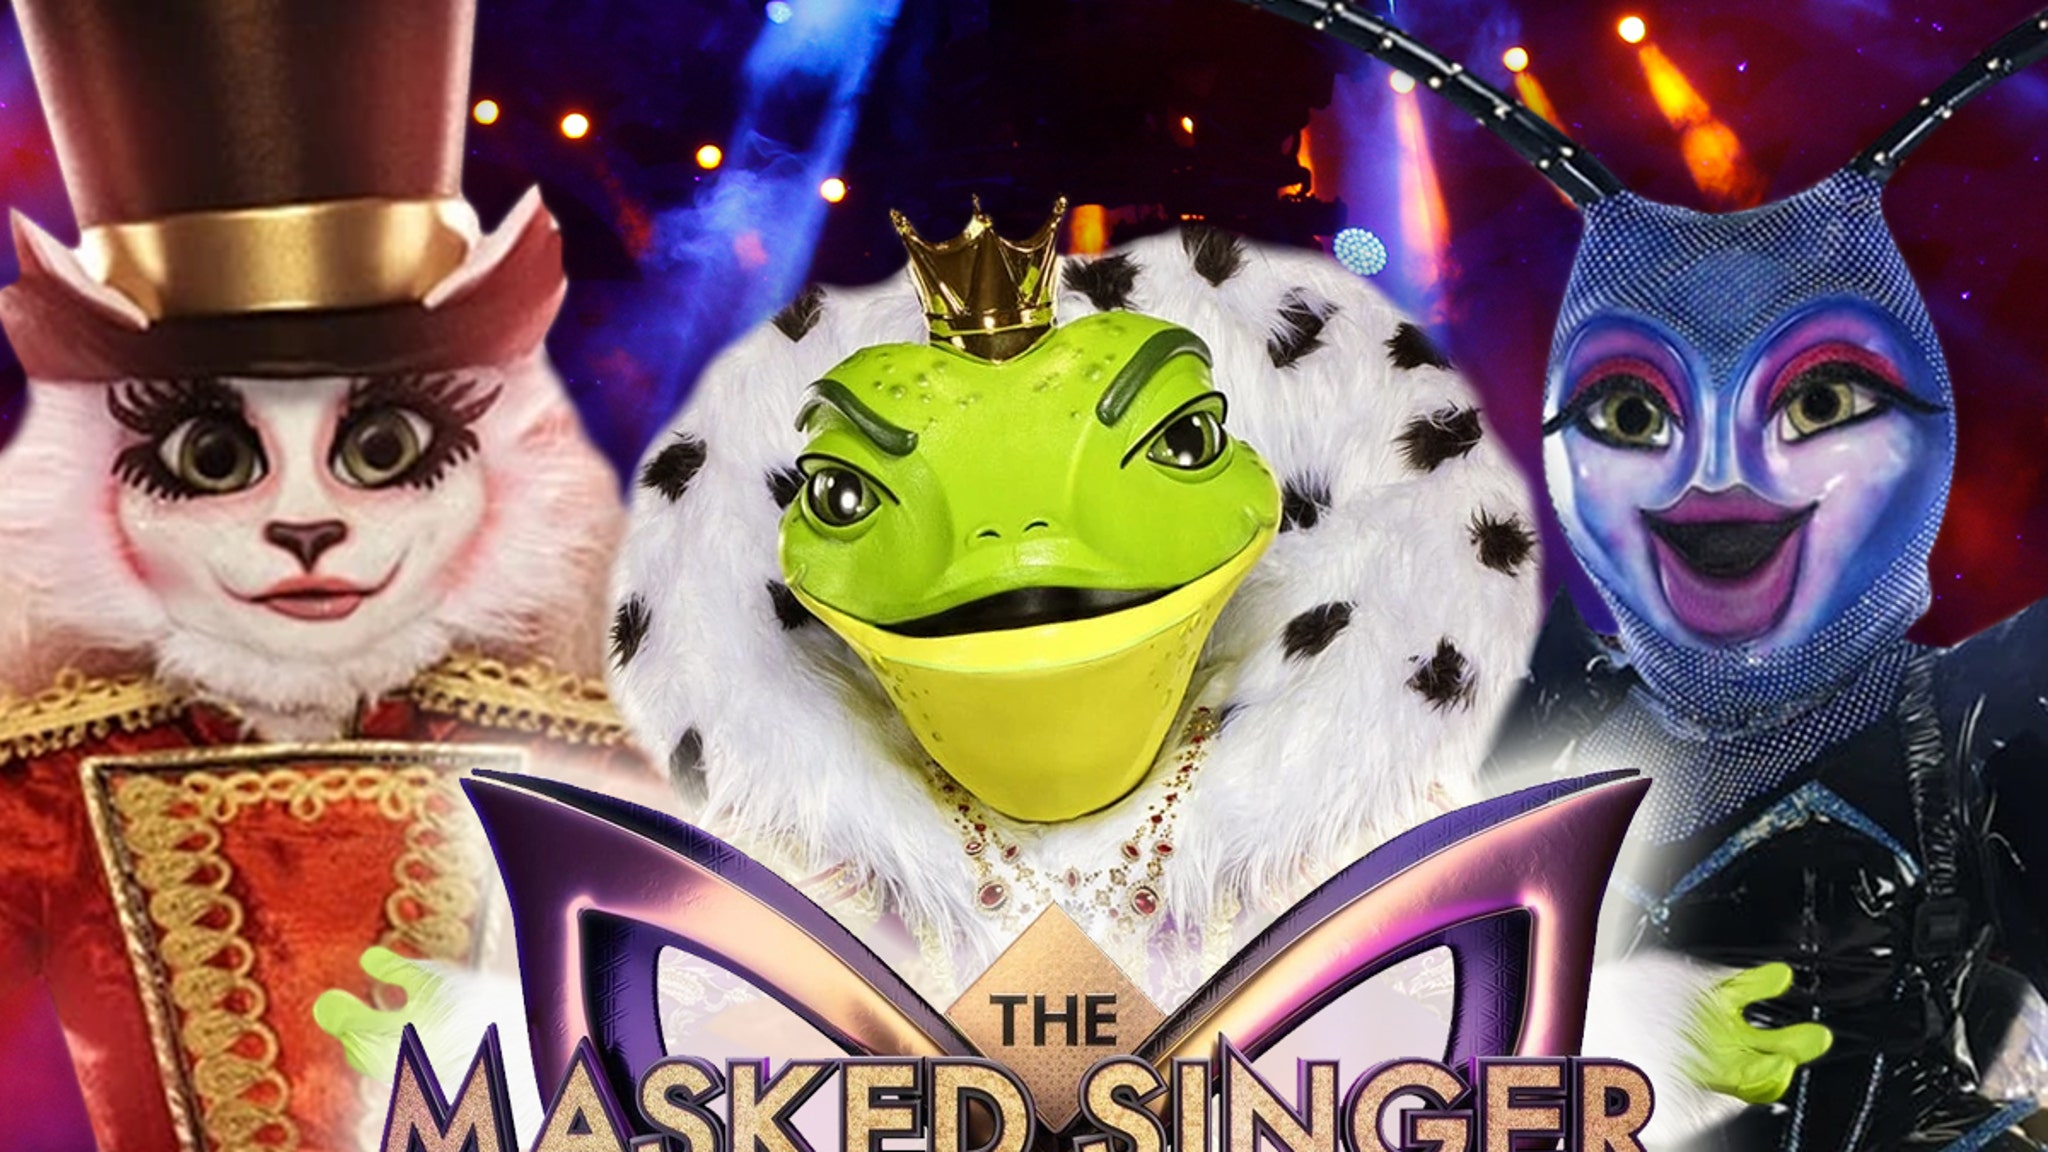 ‘The Masked Singer’ Has Longest Day of Production Ahead of Final Round